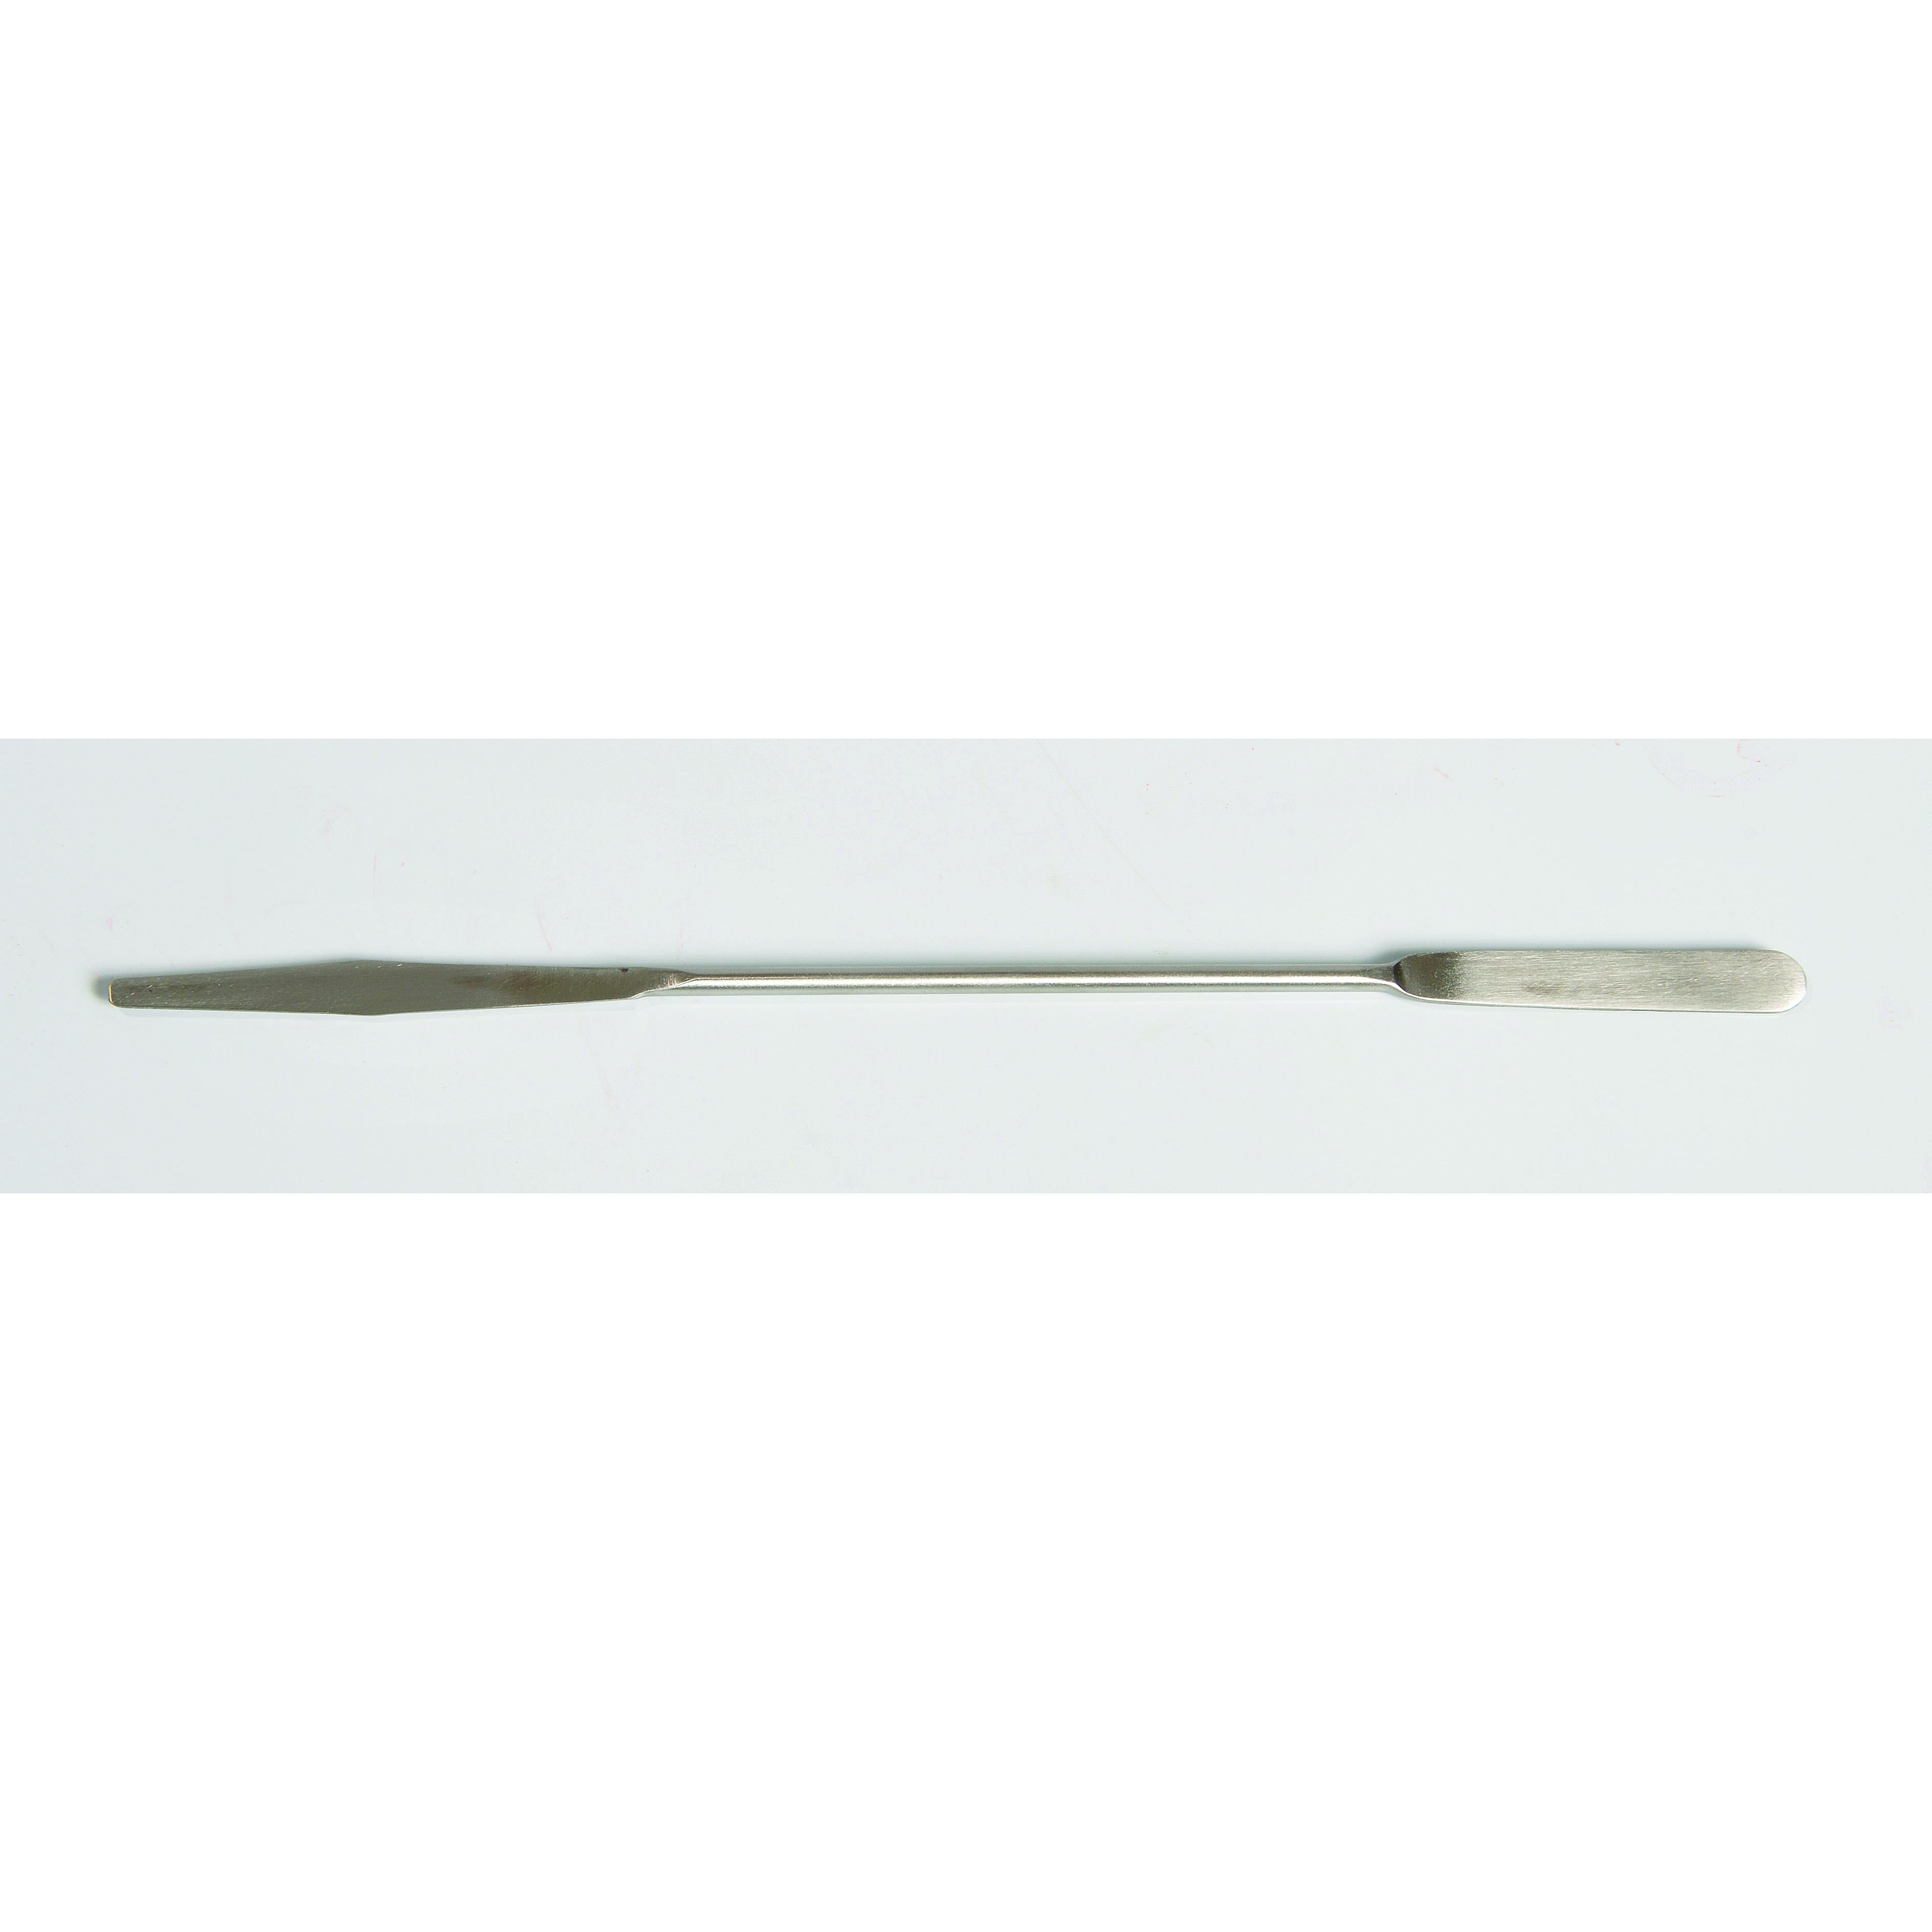 Spatula, Stainless Steel, with Flat and Tapered Ends